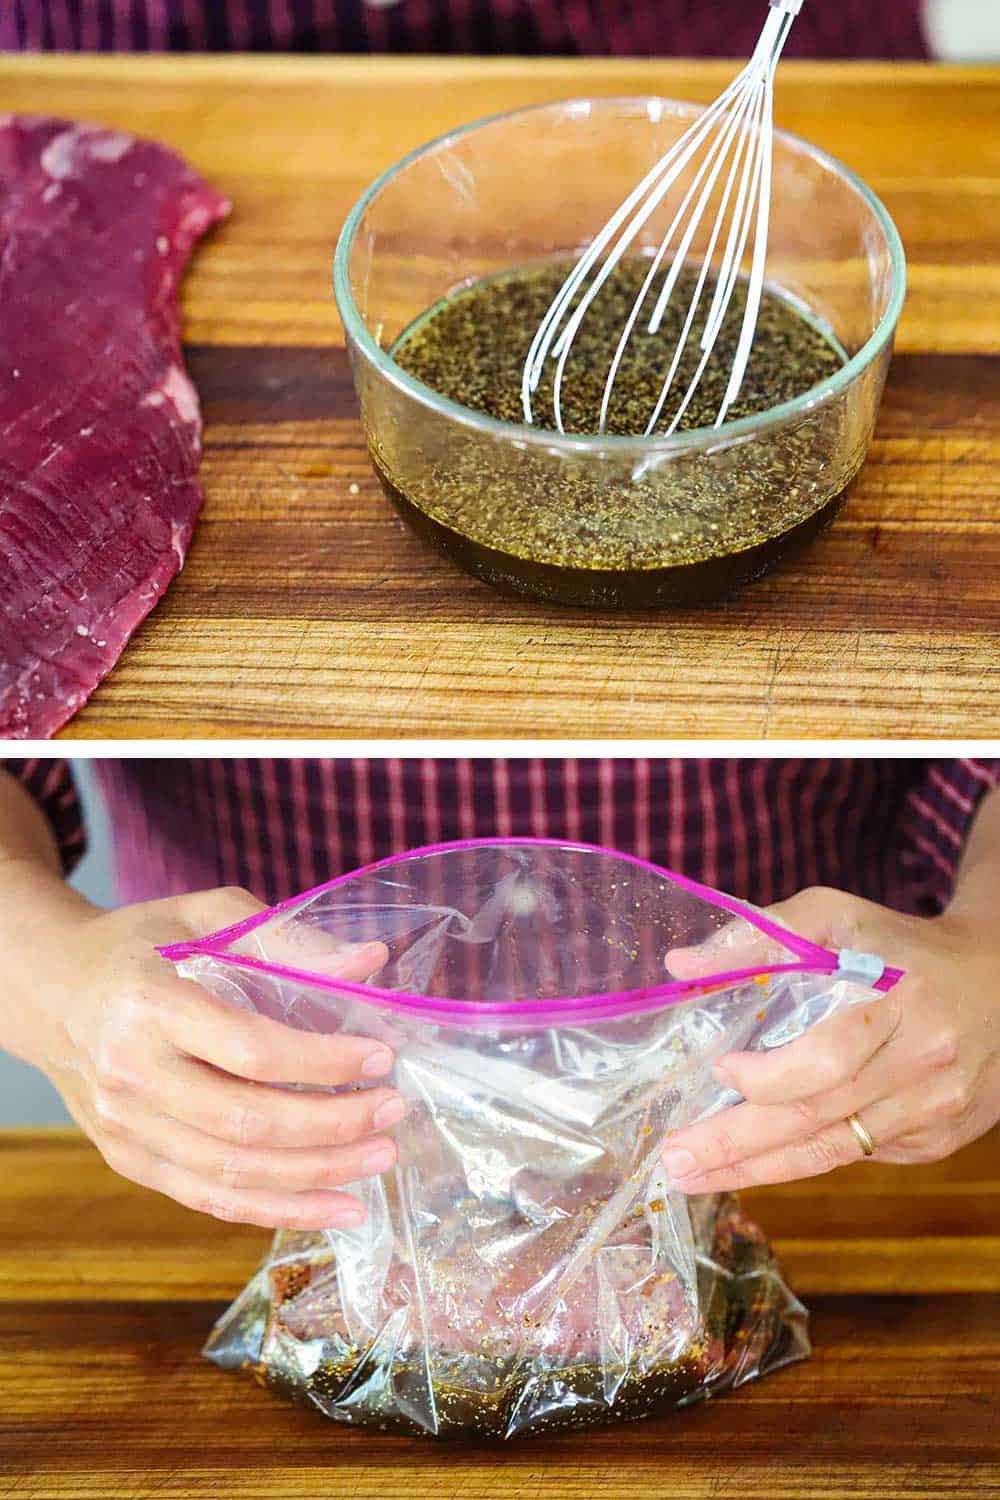 2 stacked images, the top is a whisk in a glass bowl of steak marinade, and the bottom is two hand holding a plastic baggy filled with steak and marinade. 